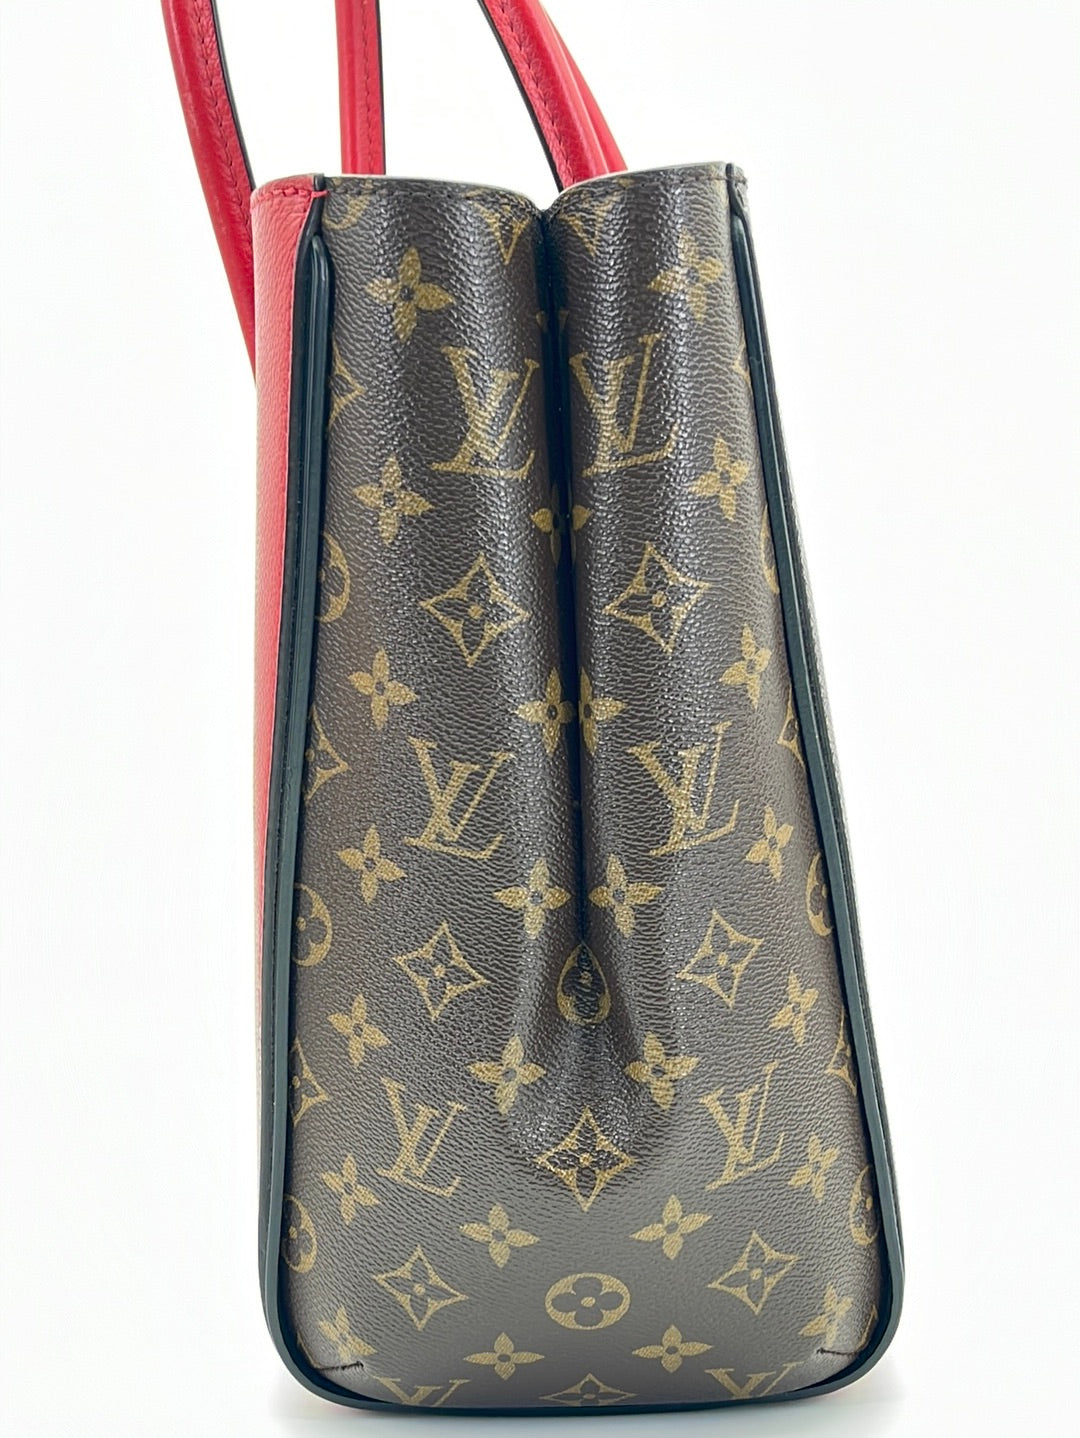 082923 Preloved Louis Vuitton Monogram and Red Leather Kimono MM